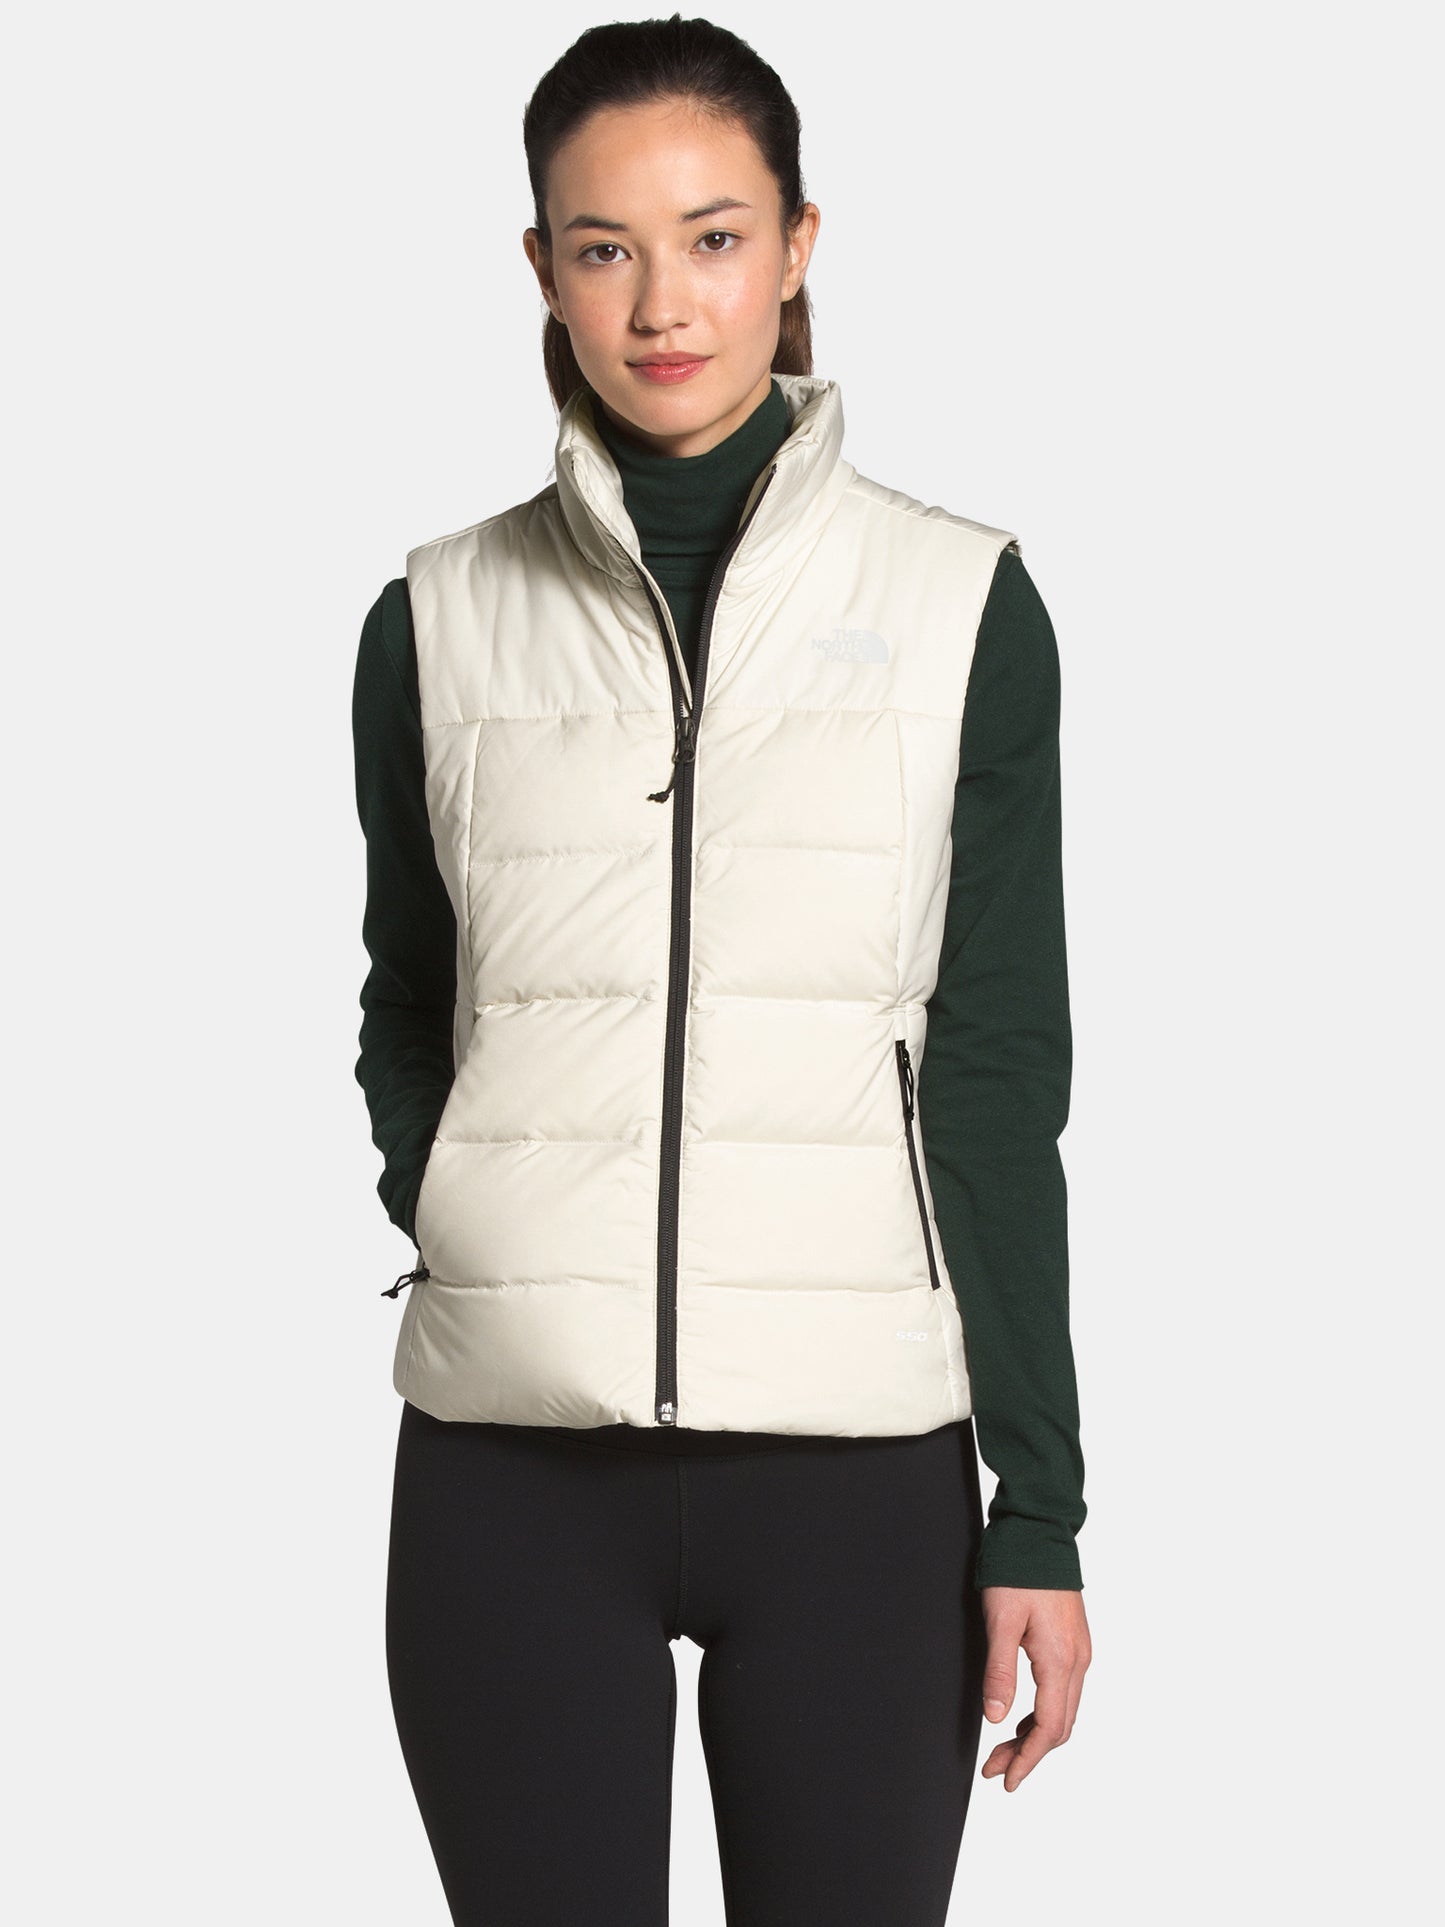 The North Face Women's Hybrid Insulation Vest